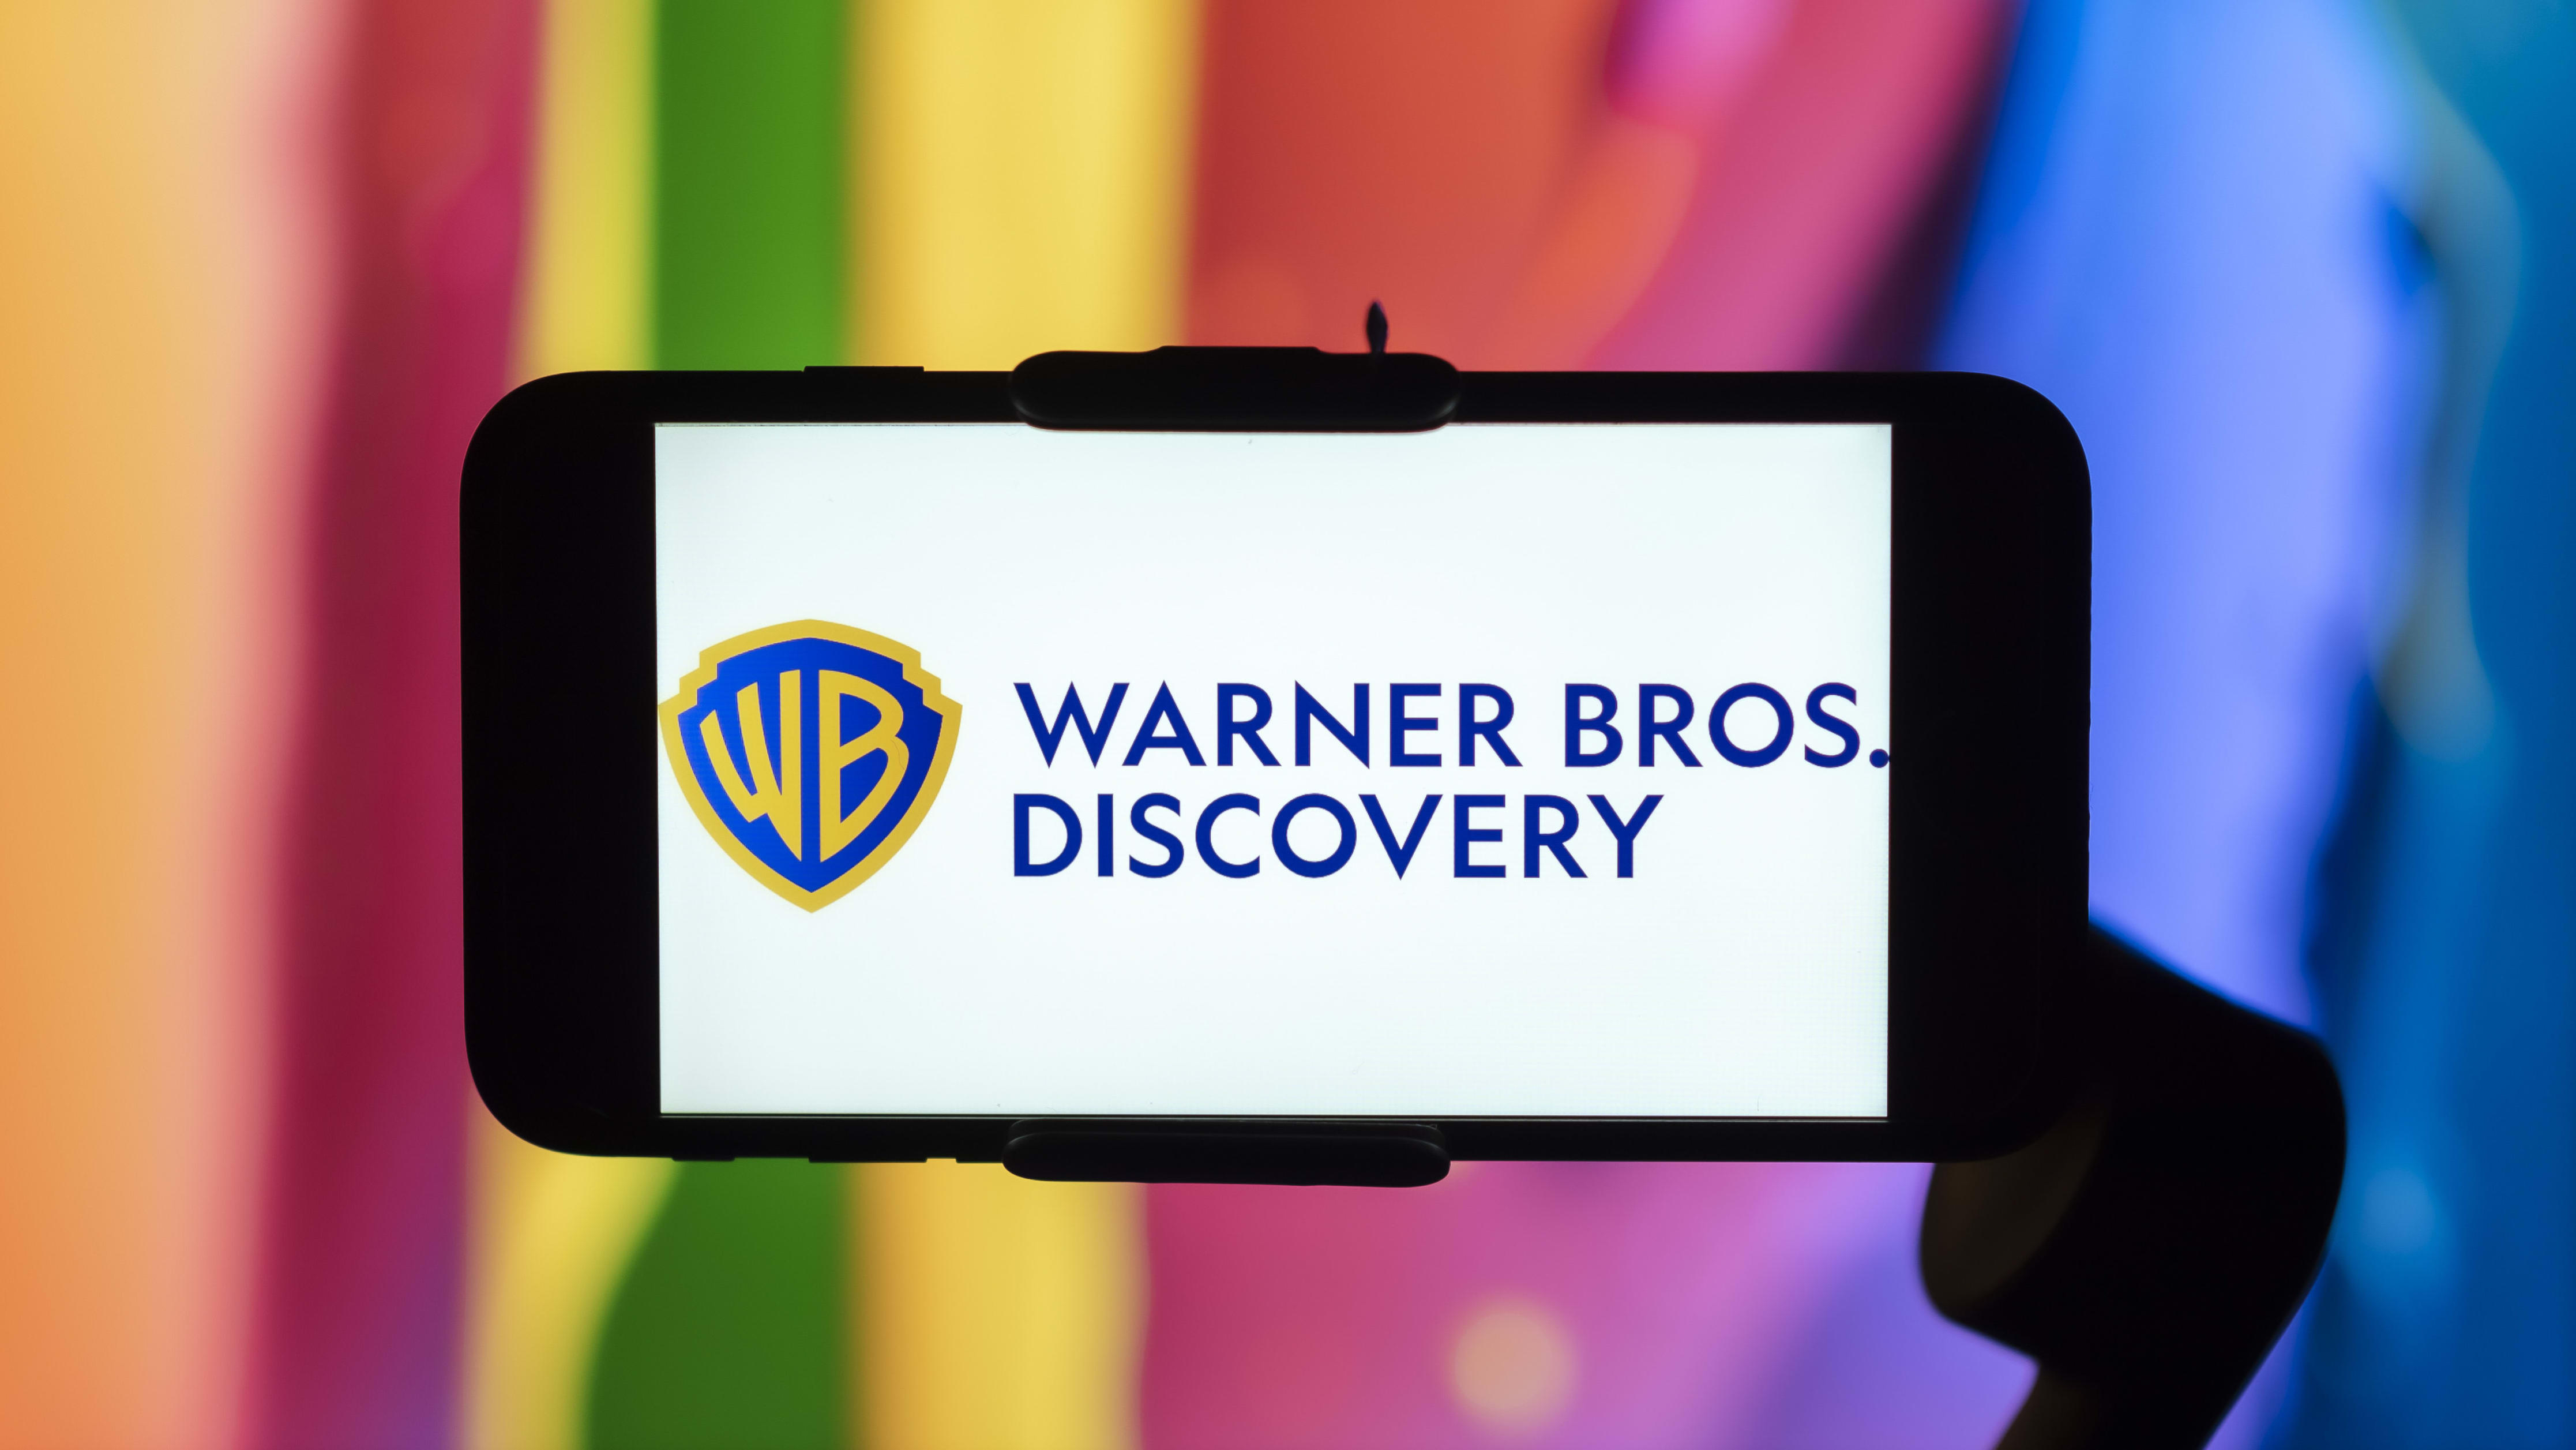 Lawmakers Think Warner Bros. Discovery Should Be Investigated